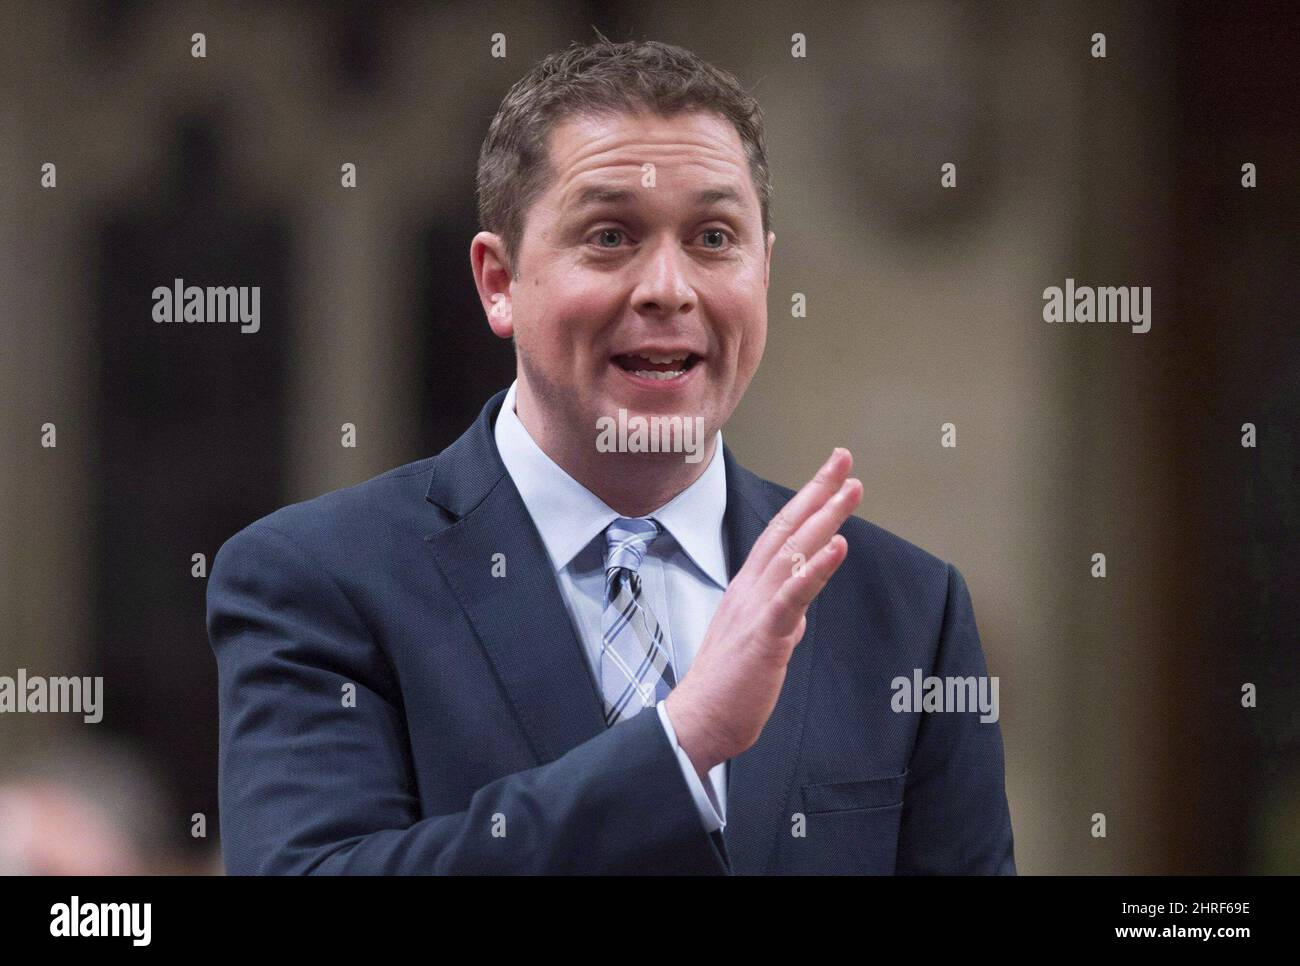 Leader of the Opposition Andrew Scheer rises in the House of Commons in Ottawa on Monday, December 11, 2017. New fundraising numbers show the Conservatives trounced the governing Liberals in the first three months of 2018 â€” and suggest the Tories are chugging along with a strong head of steam heading into next year's federal election. THE CANADIAN PRESS/Adrian Wyld Stock Photo